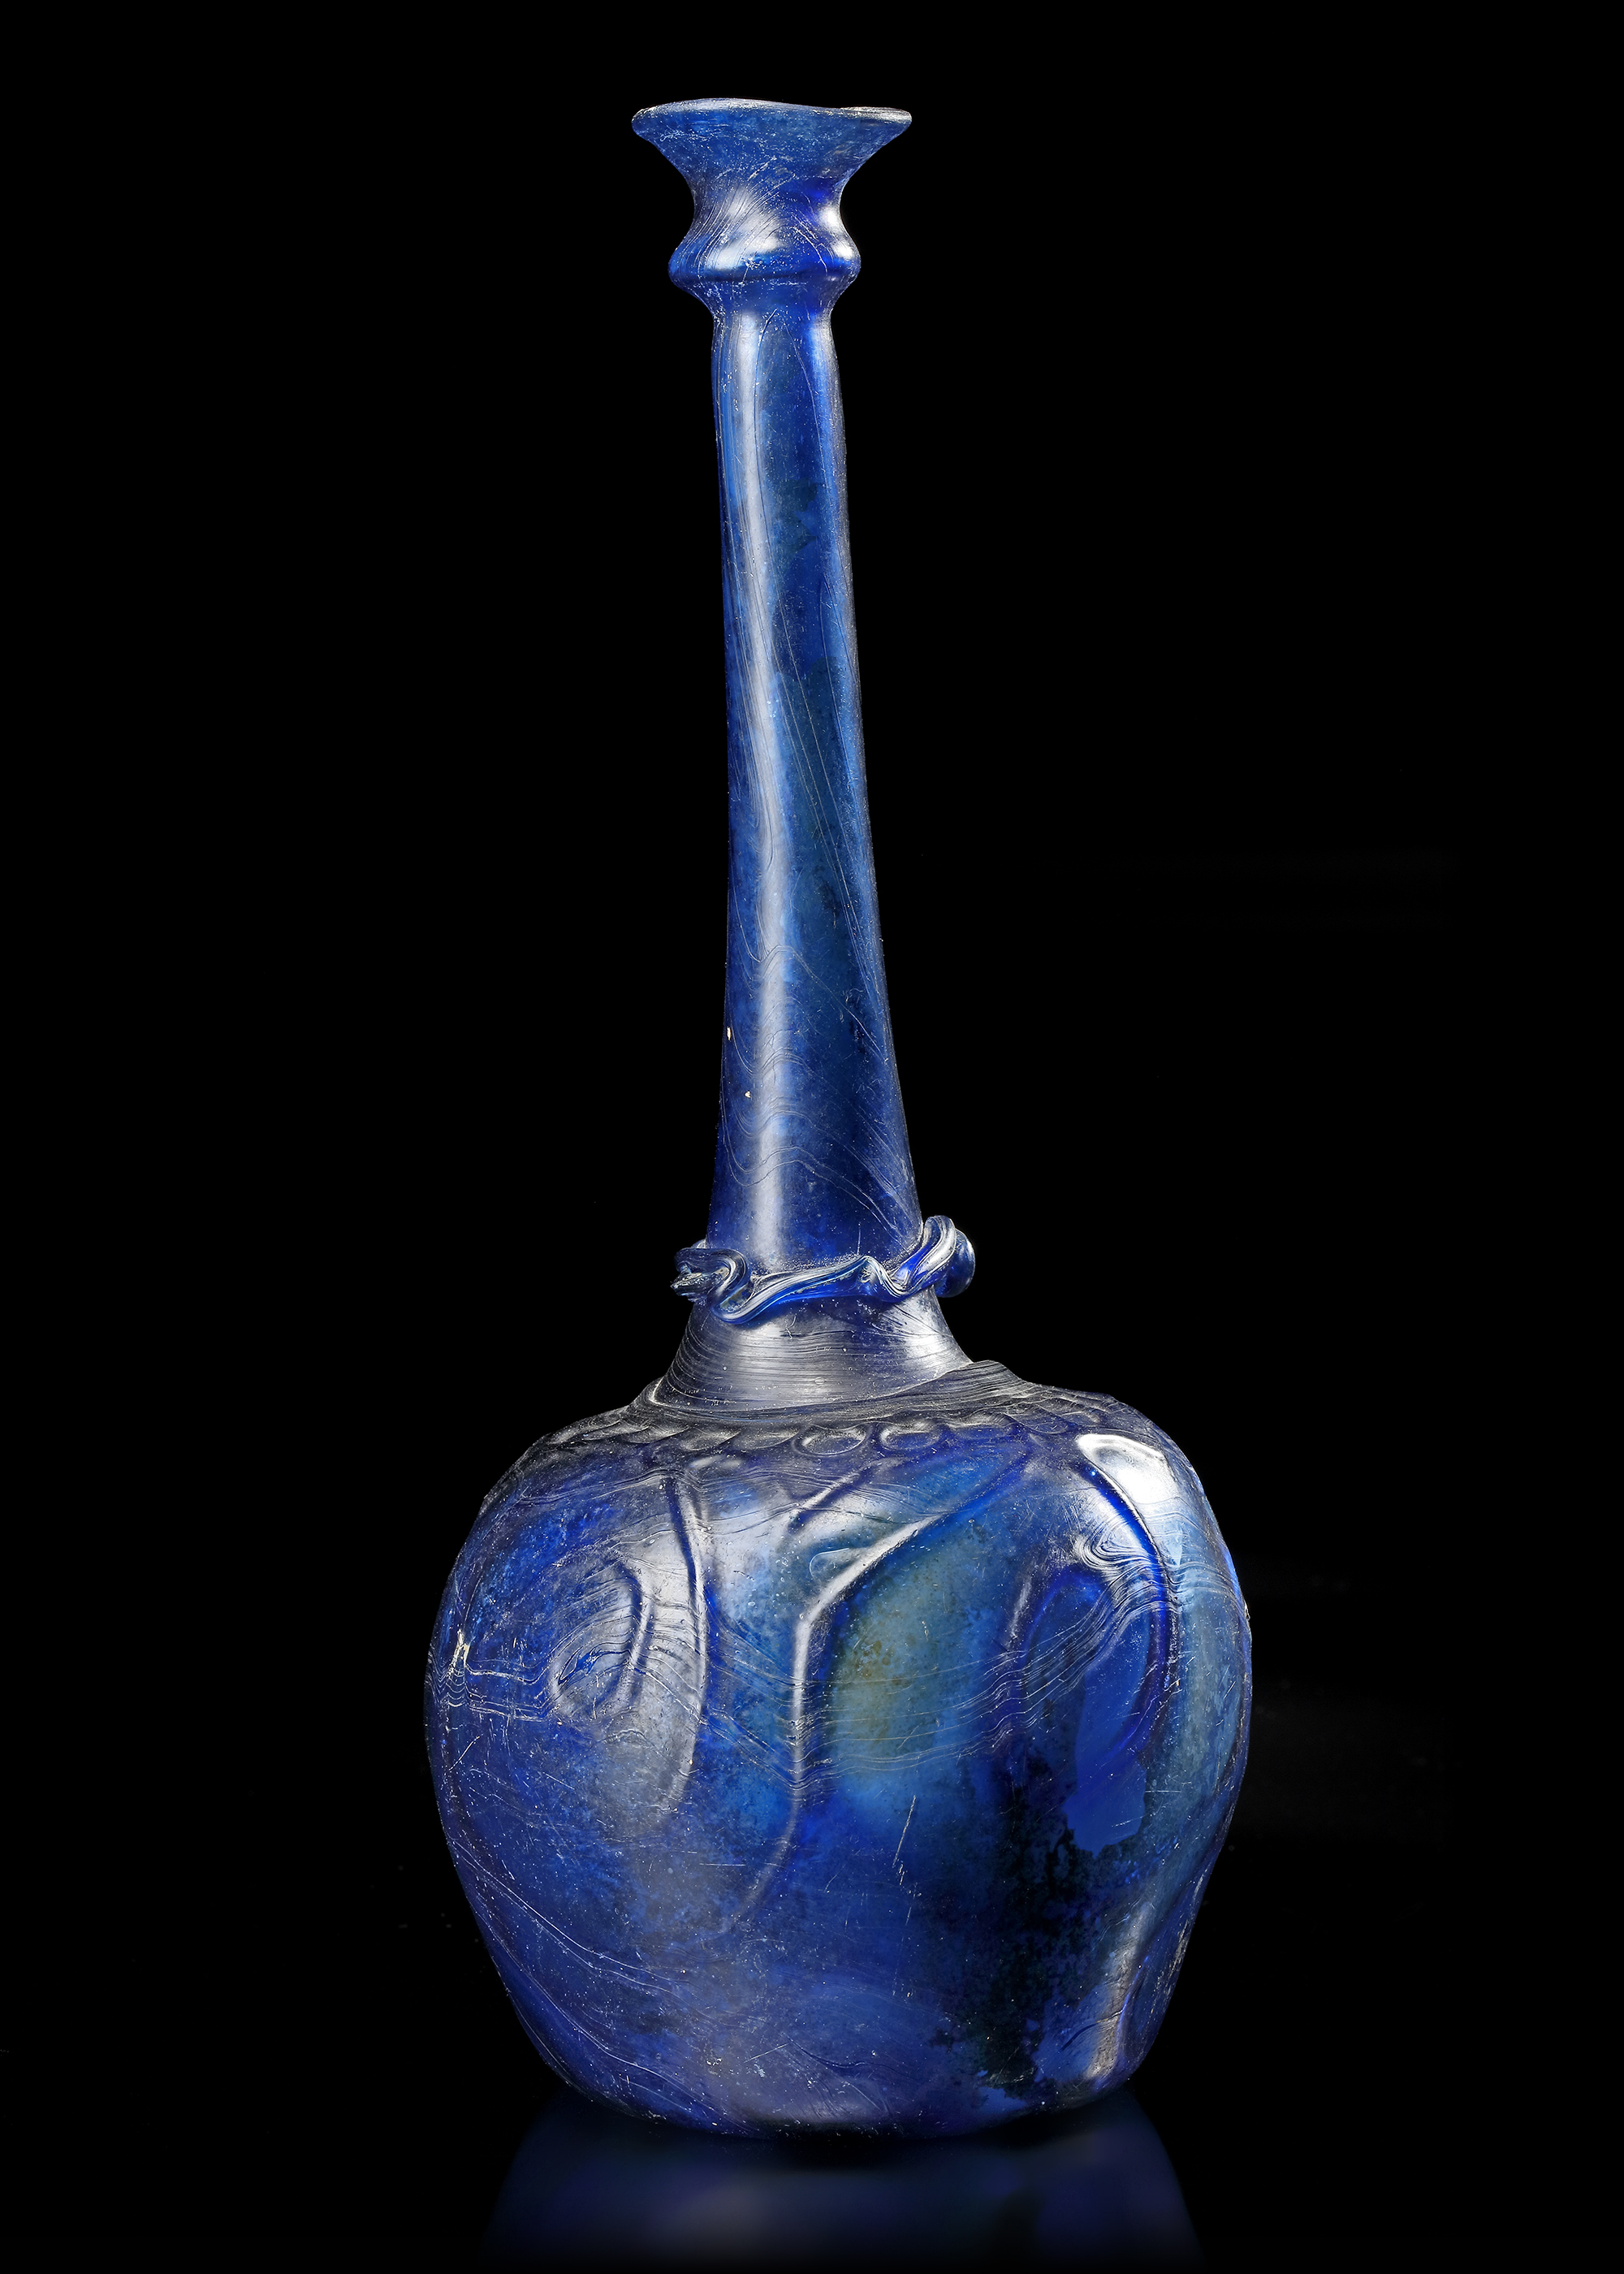 A LARGE MOULD-BLOWN BLUE GLASS BOTTLE-VASE OR SPRINKLER, PERSIA, 12TH CENTURY - Image 11 of 14